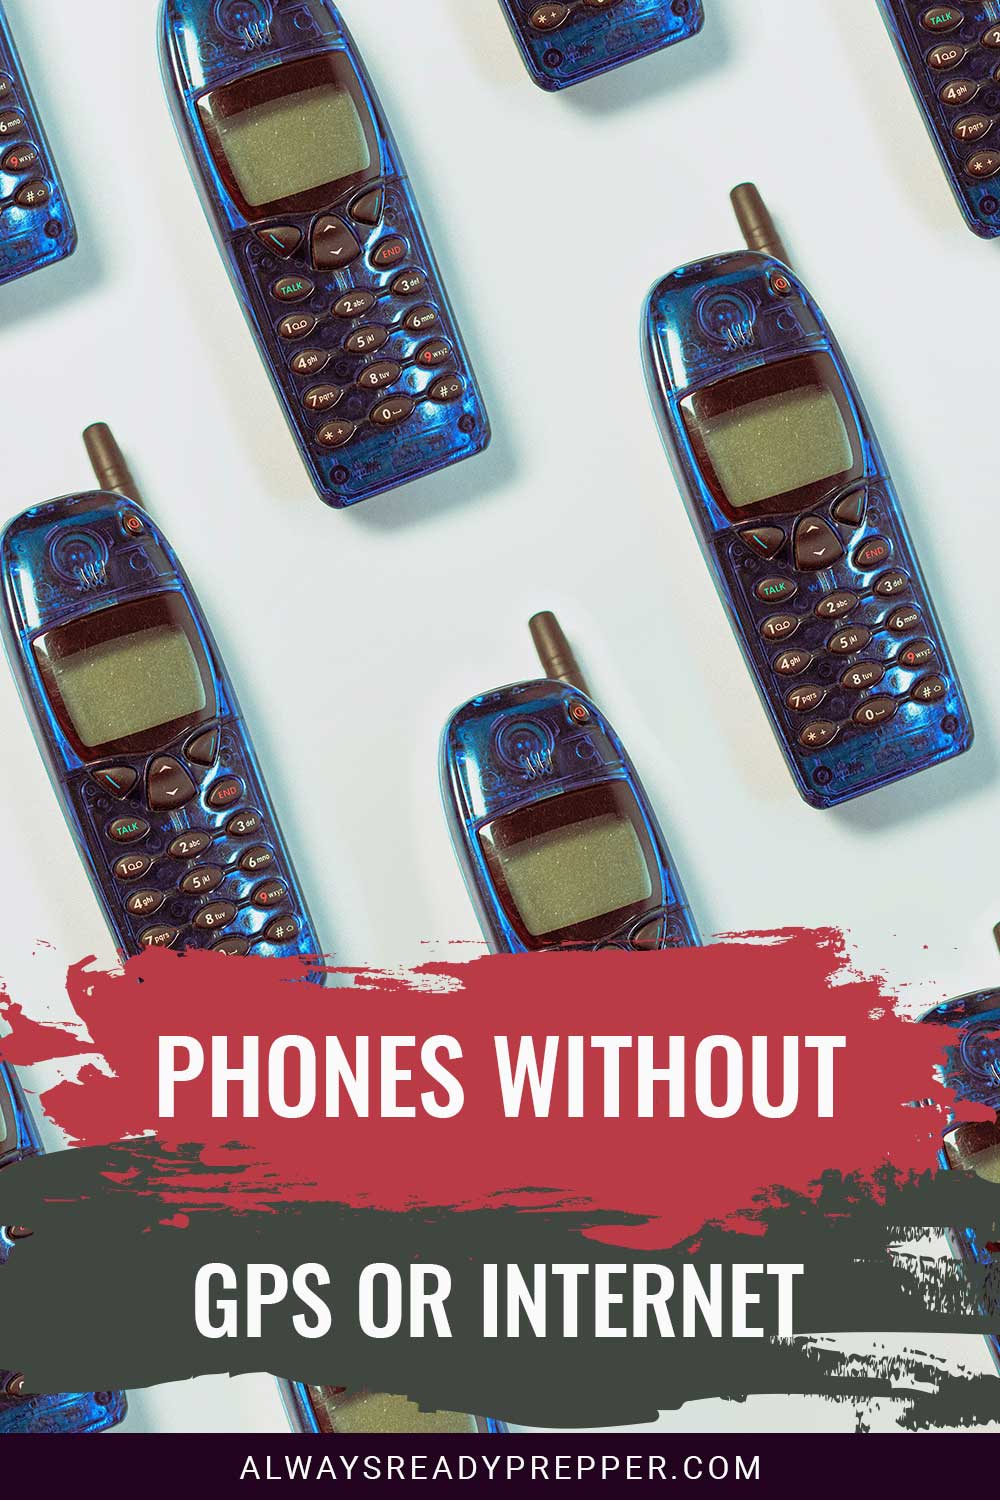 Bunch of old phones with small antennas - Phones Without GPS or Internet.